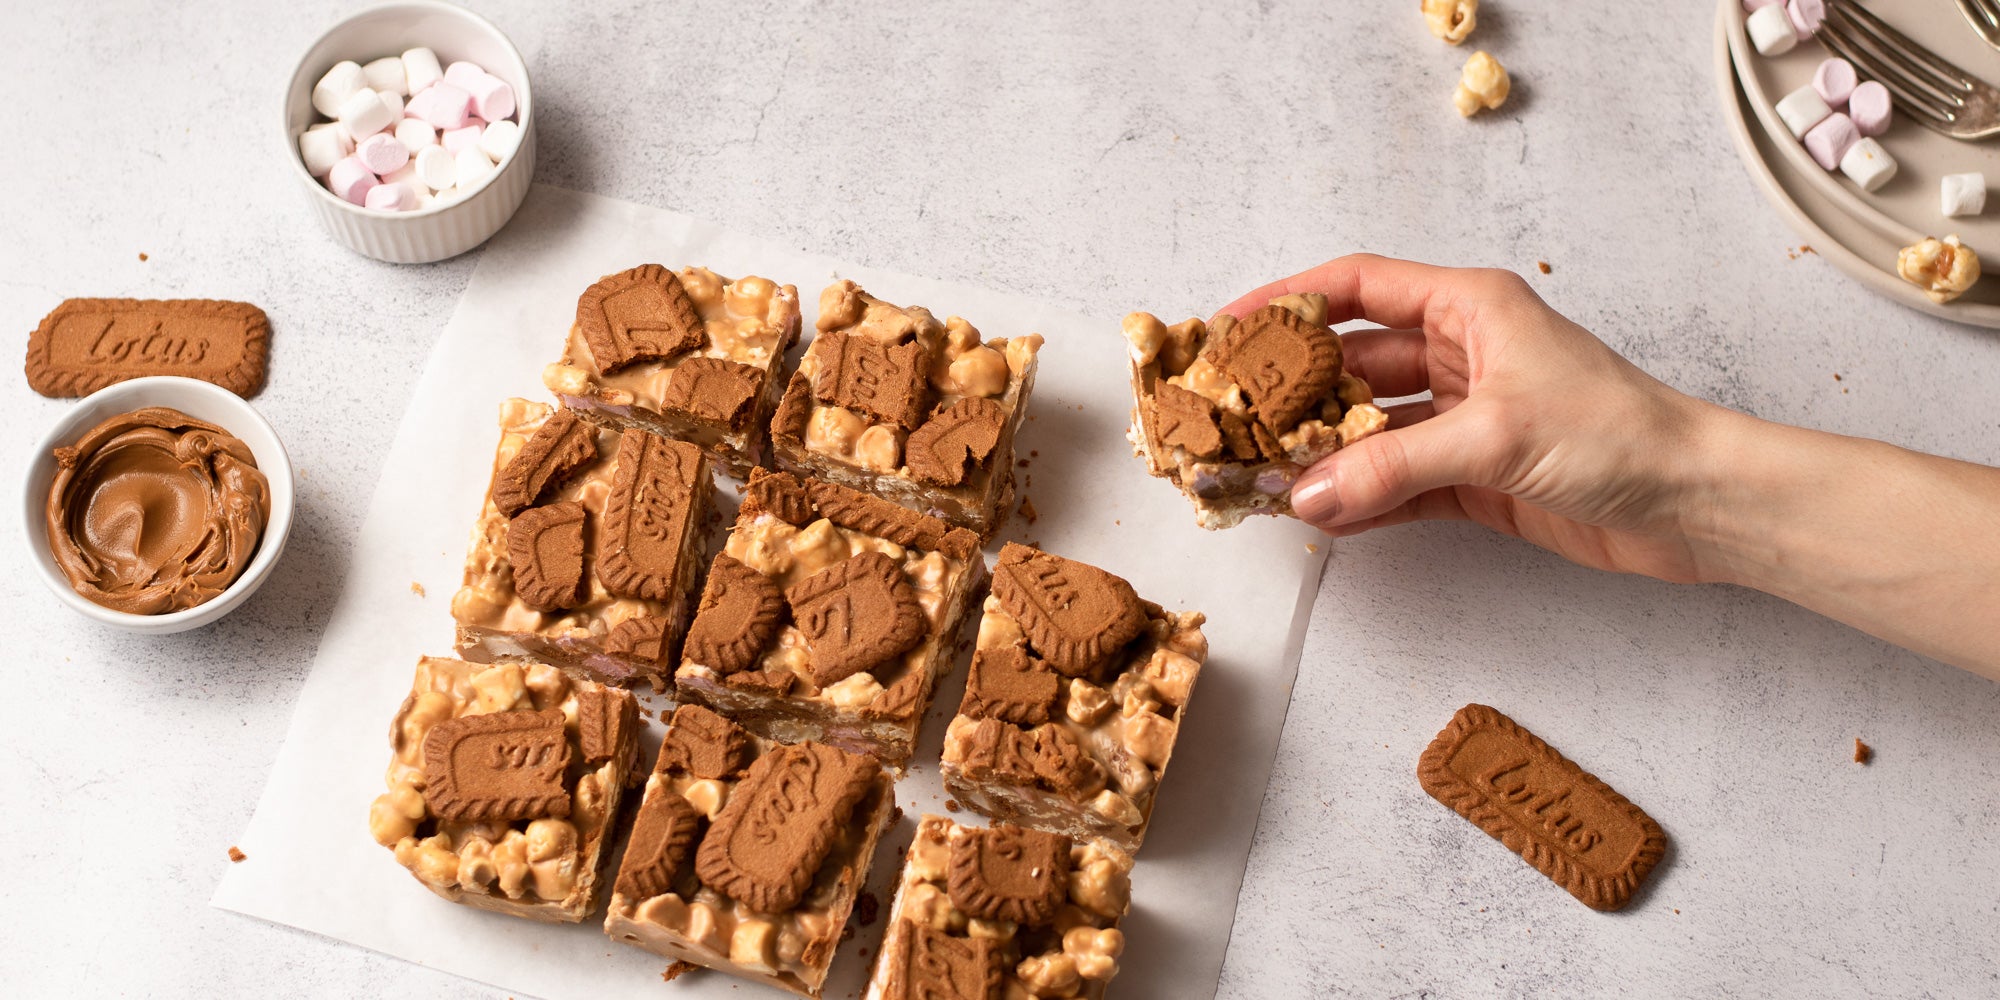 Biscoff rocky road sliced into 9 pieces with a hand taking one slice